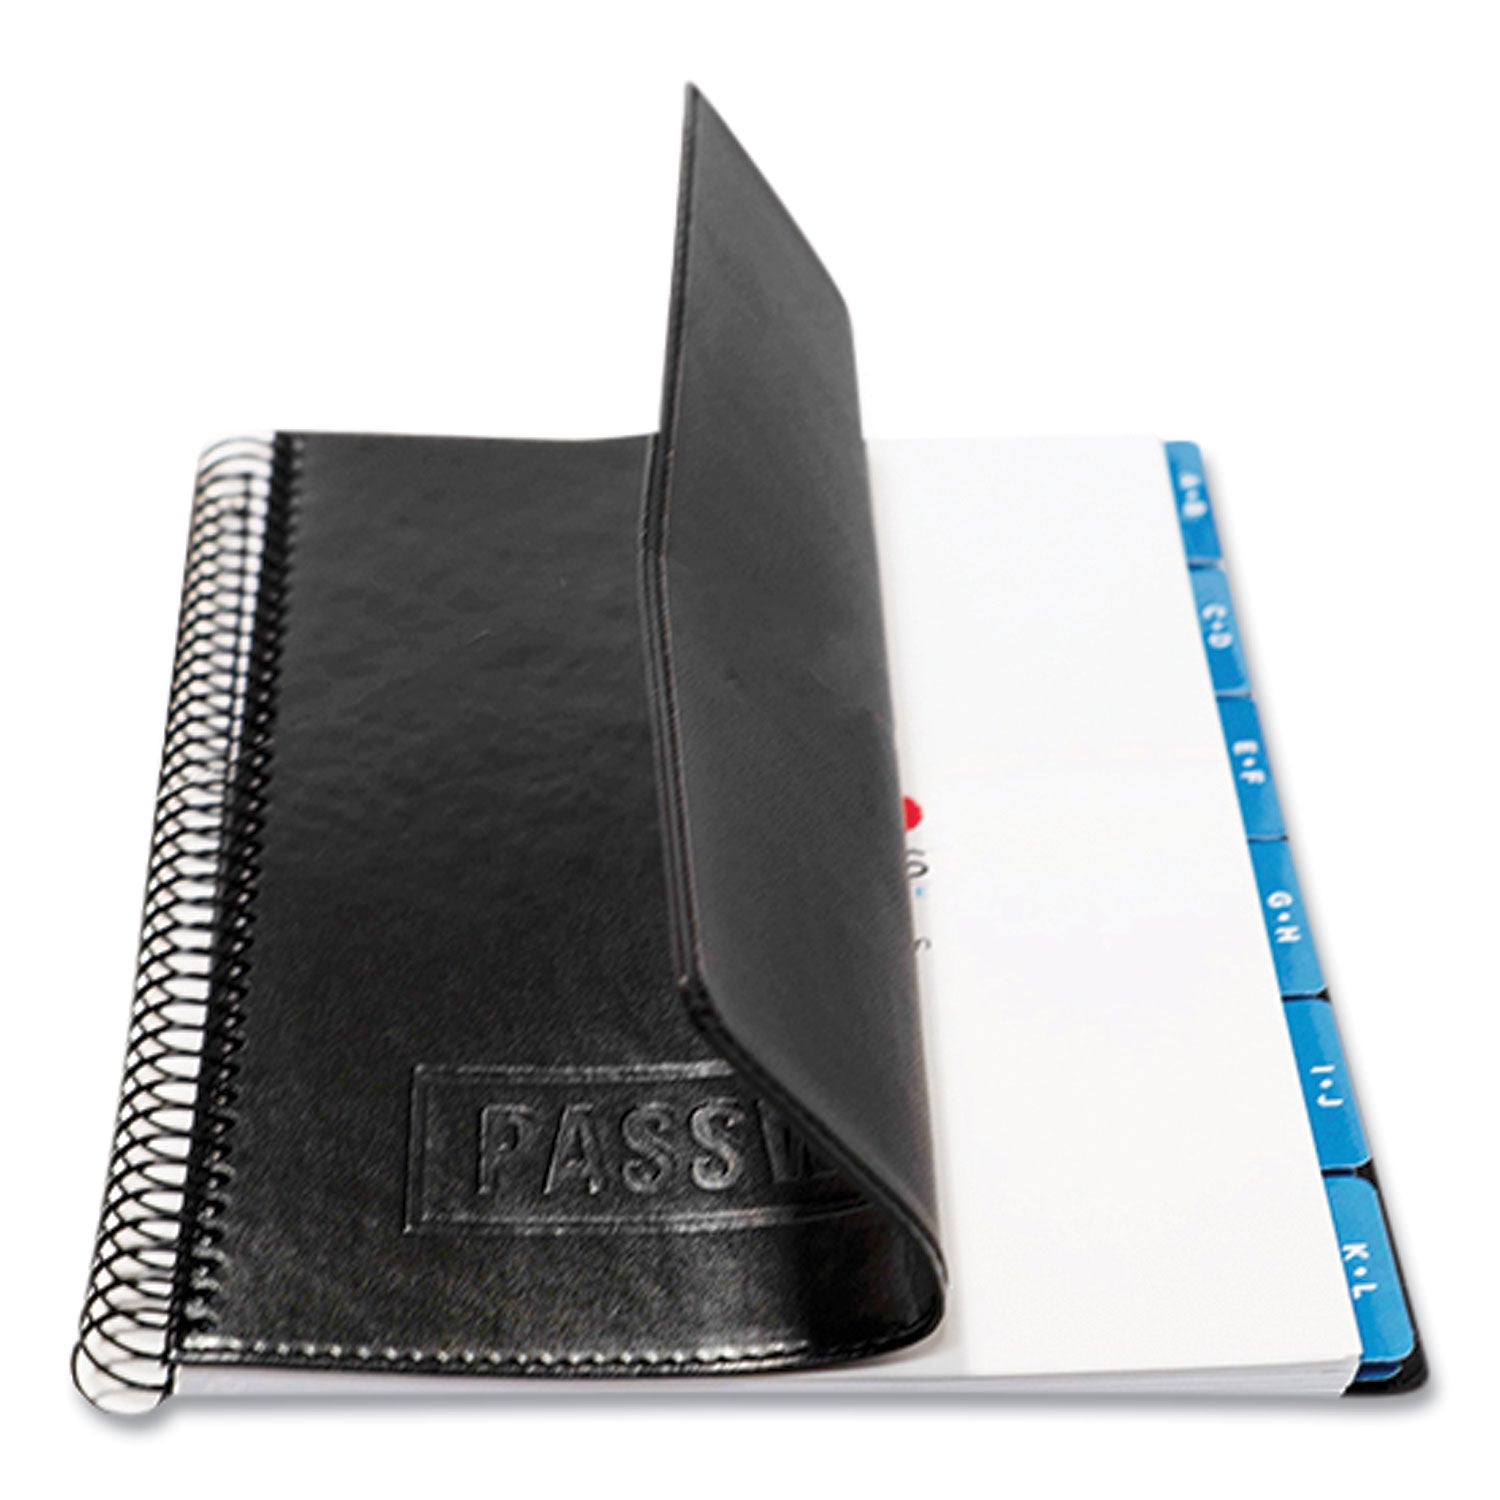 executive-format-password-log-book-576-total-entries-4-entries-page-black-faux-leather-cover-72-10-x-76-sheets_rfcexpwbookblk - 3